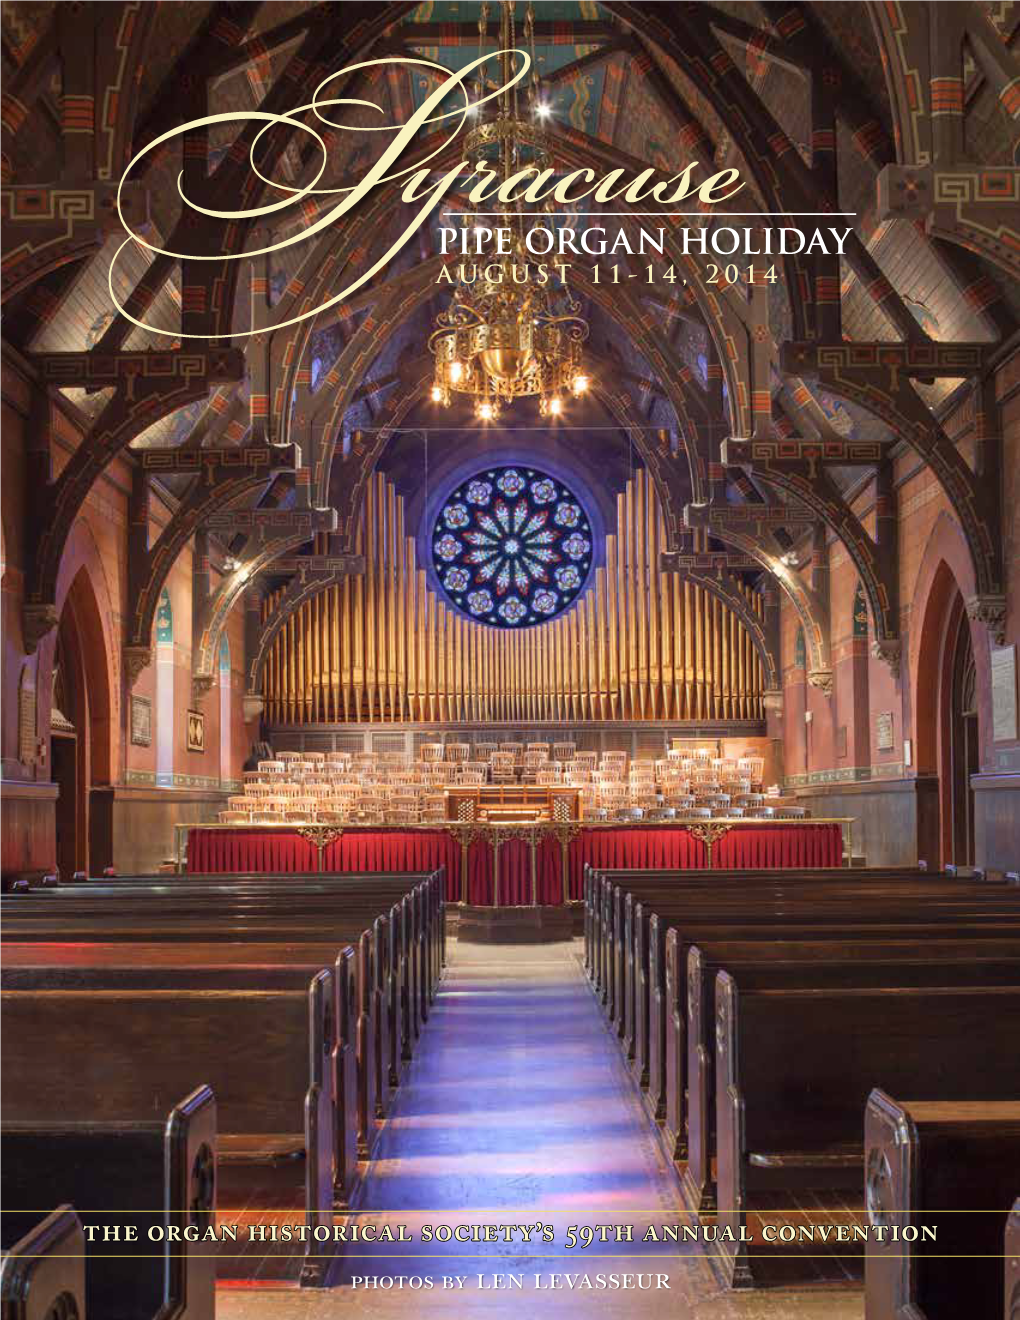 THE Organ Historical Society's 59TH Annual Convention